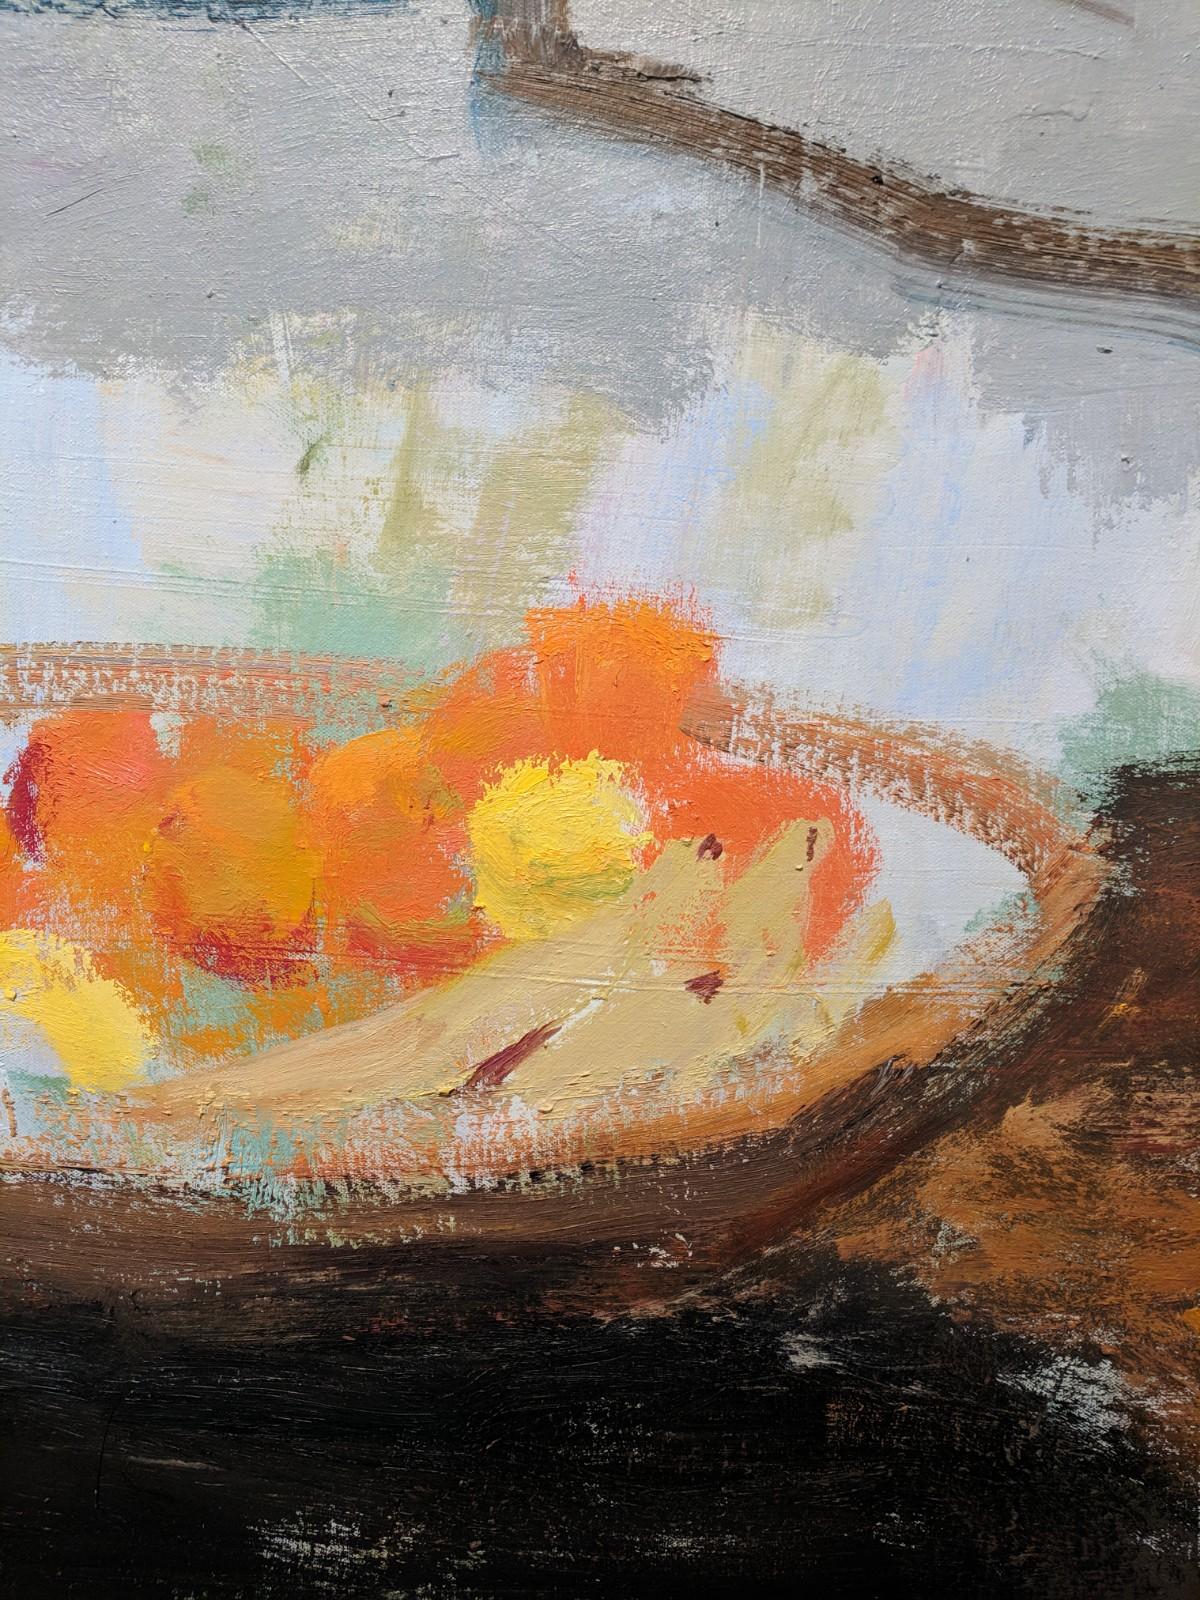 Rustic Window, Fruit Still Life, Interior in Gray, Brown, Yellow, Orange - Contemporary Painting by Melanie Parke